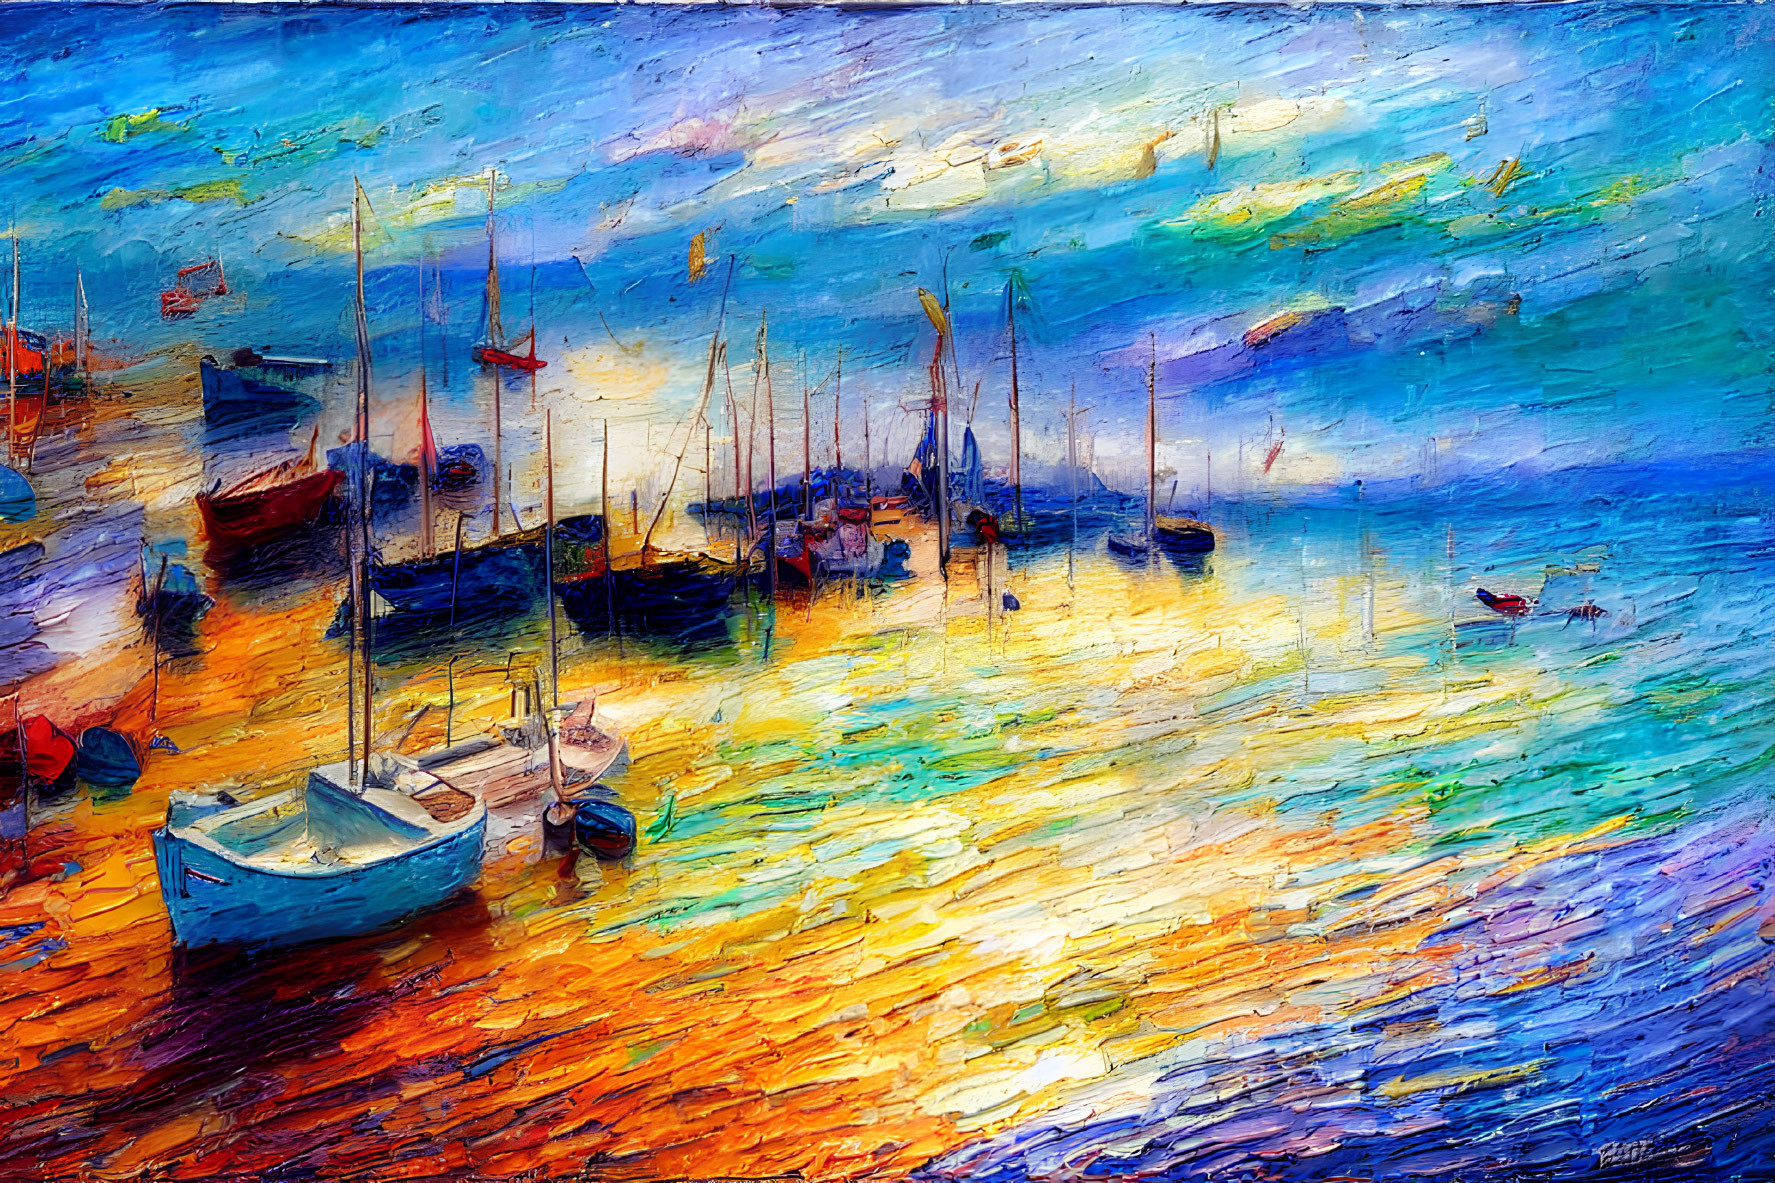 Vibrant impressionistic painting of boats in shimmering harbor at sunset